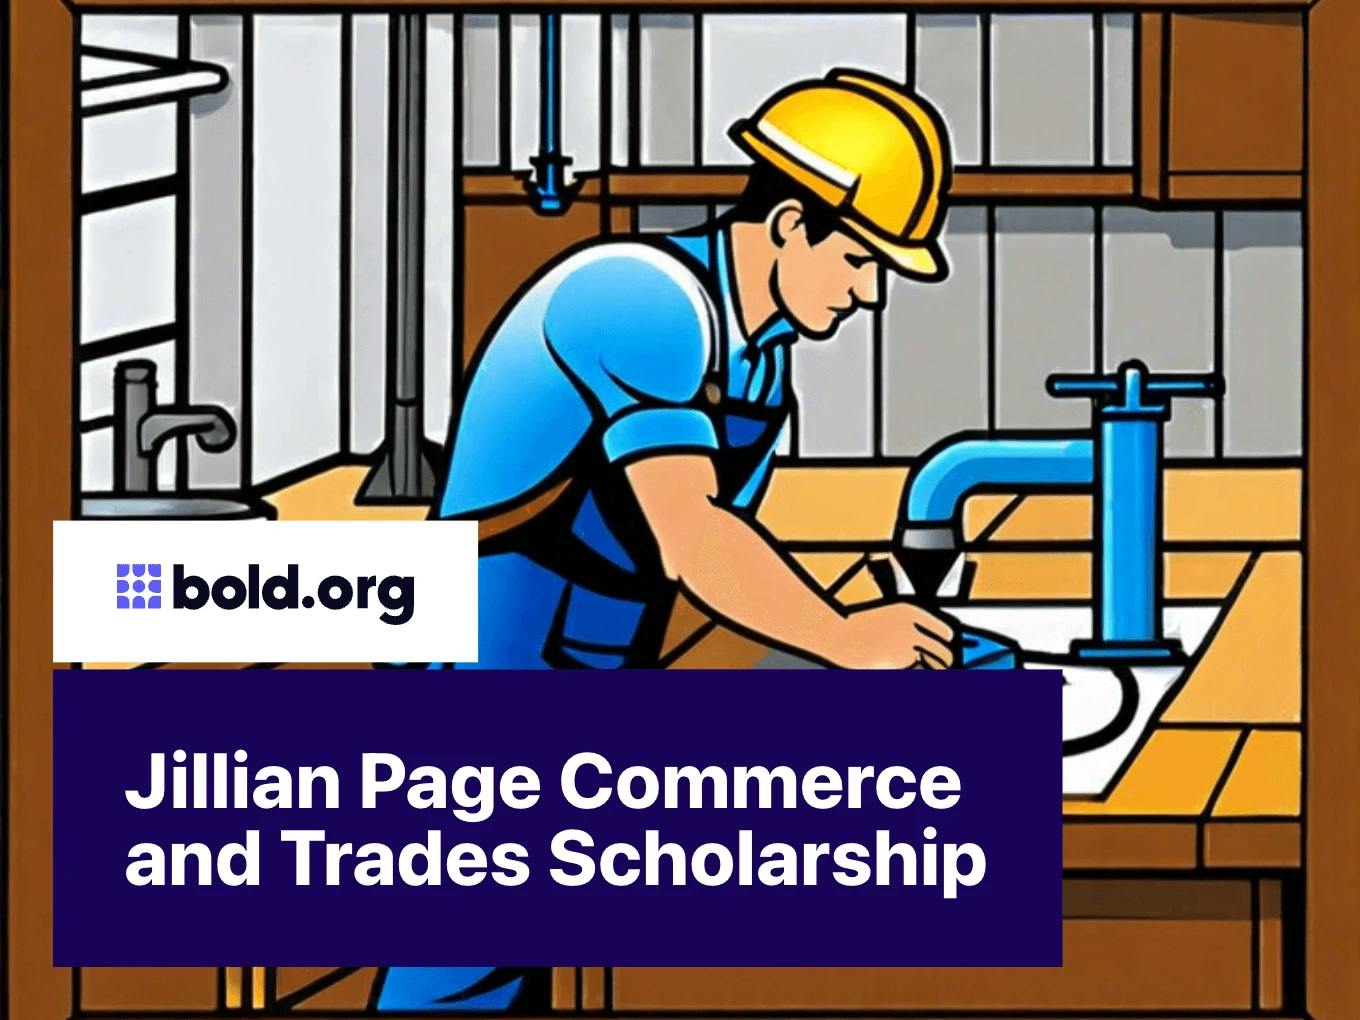 Jillian Page Commerce and Trades Scholarship